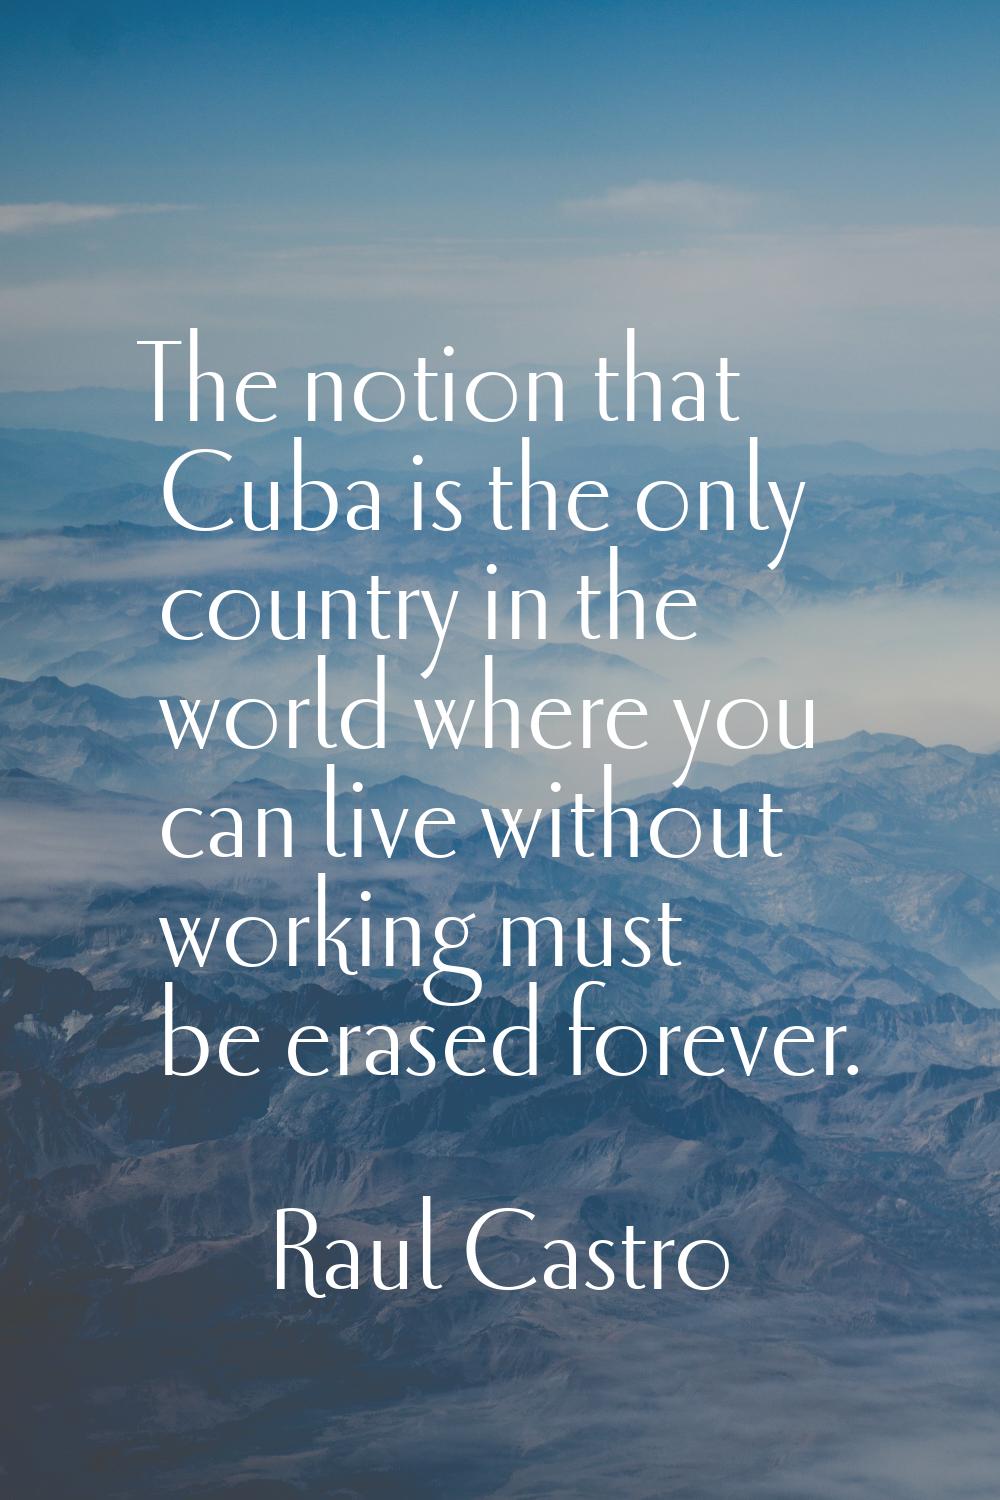 The notion that Cuba is the only country in the world where you can live without working must be er